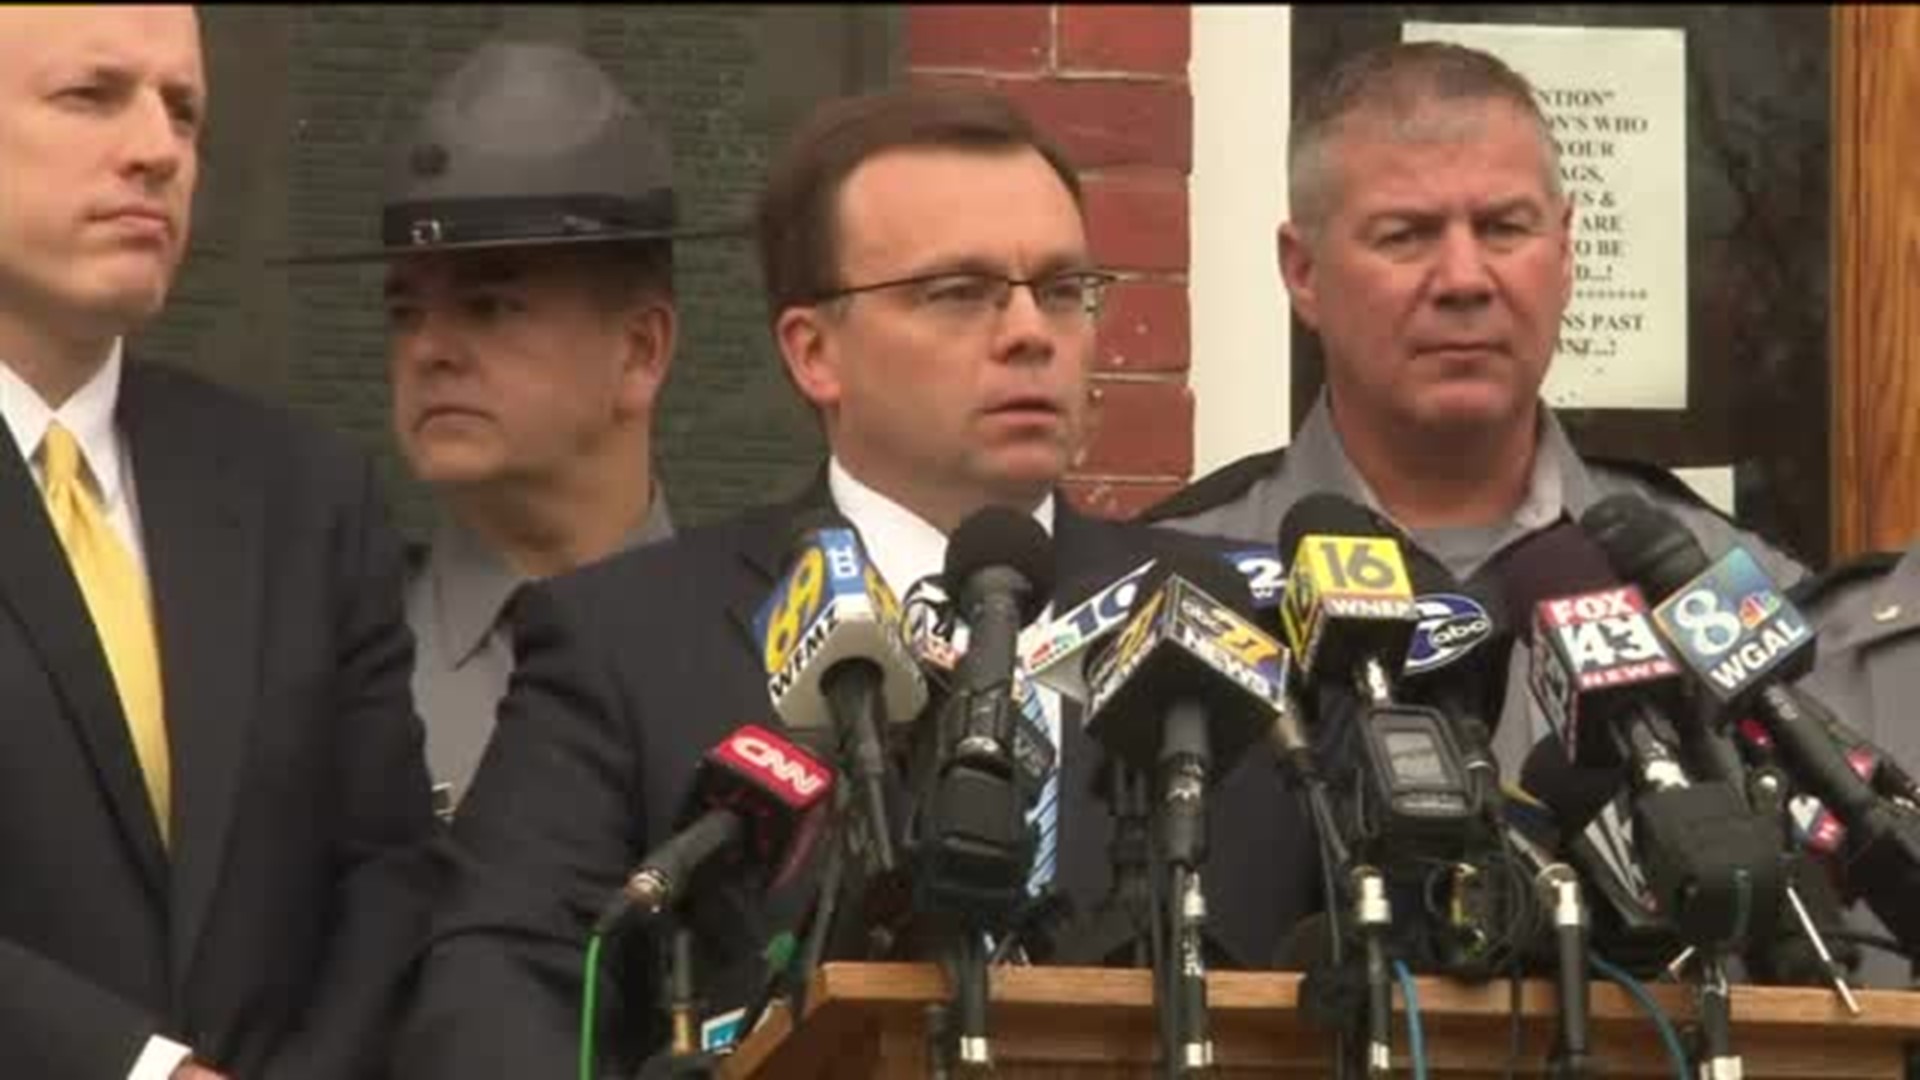 Eric Frein press conference